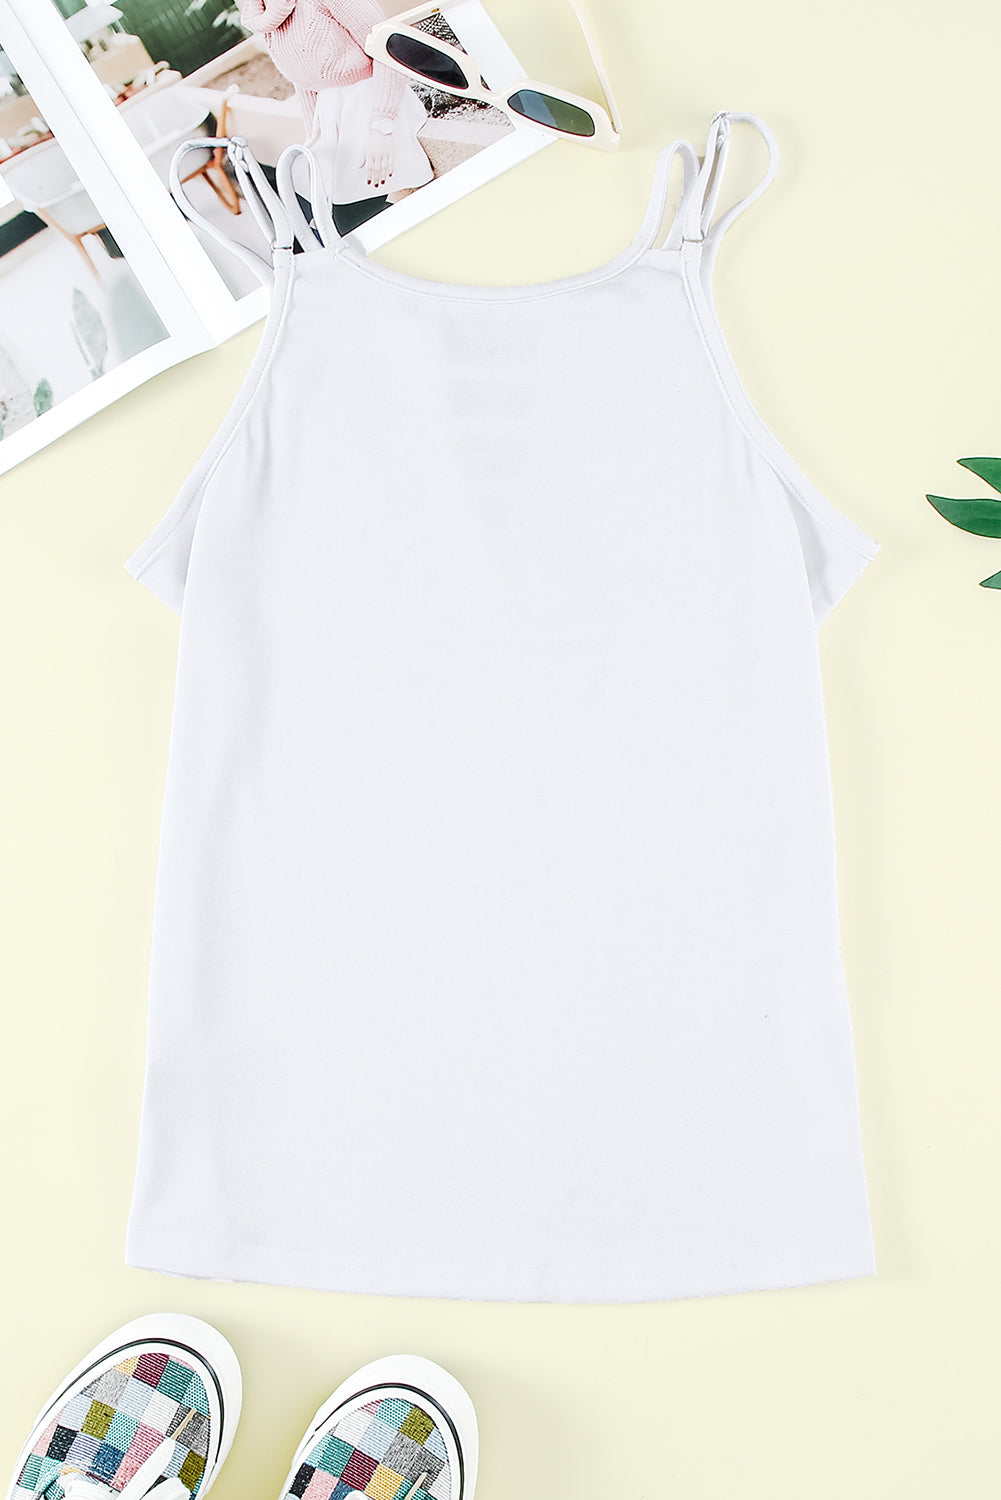 White Ladder Hollow-out Tank Top